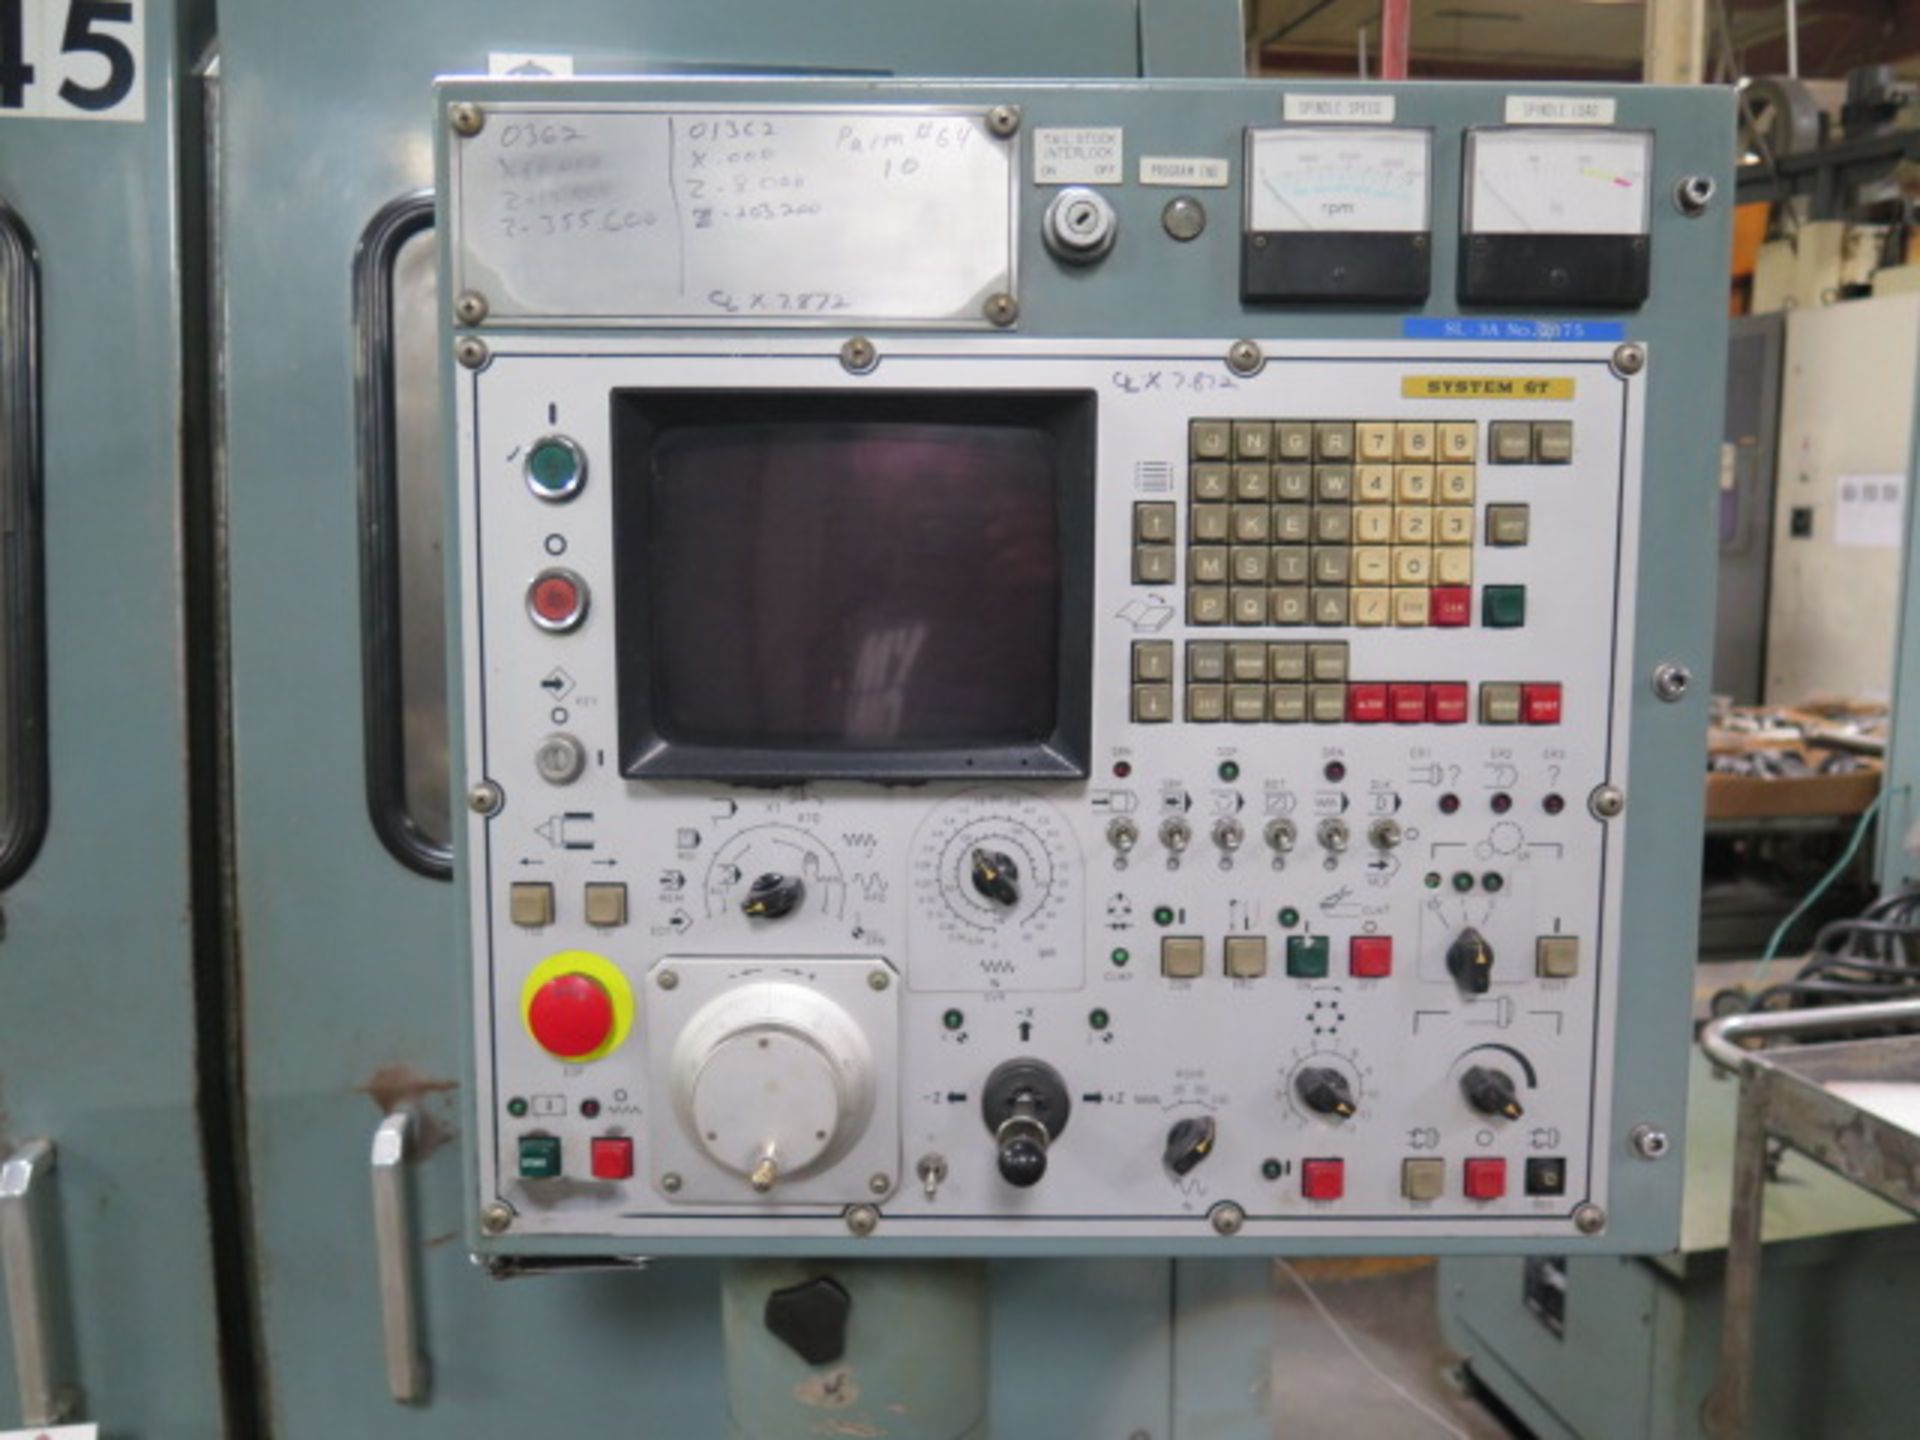 Mori Seiki SL-3A CNC Turning Center s/n 2075 w/ Fanuc 6T Controls, 12-Station Turret, SOLD AS IS - Image 10 of 13